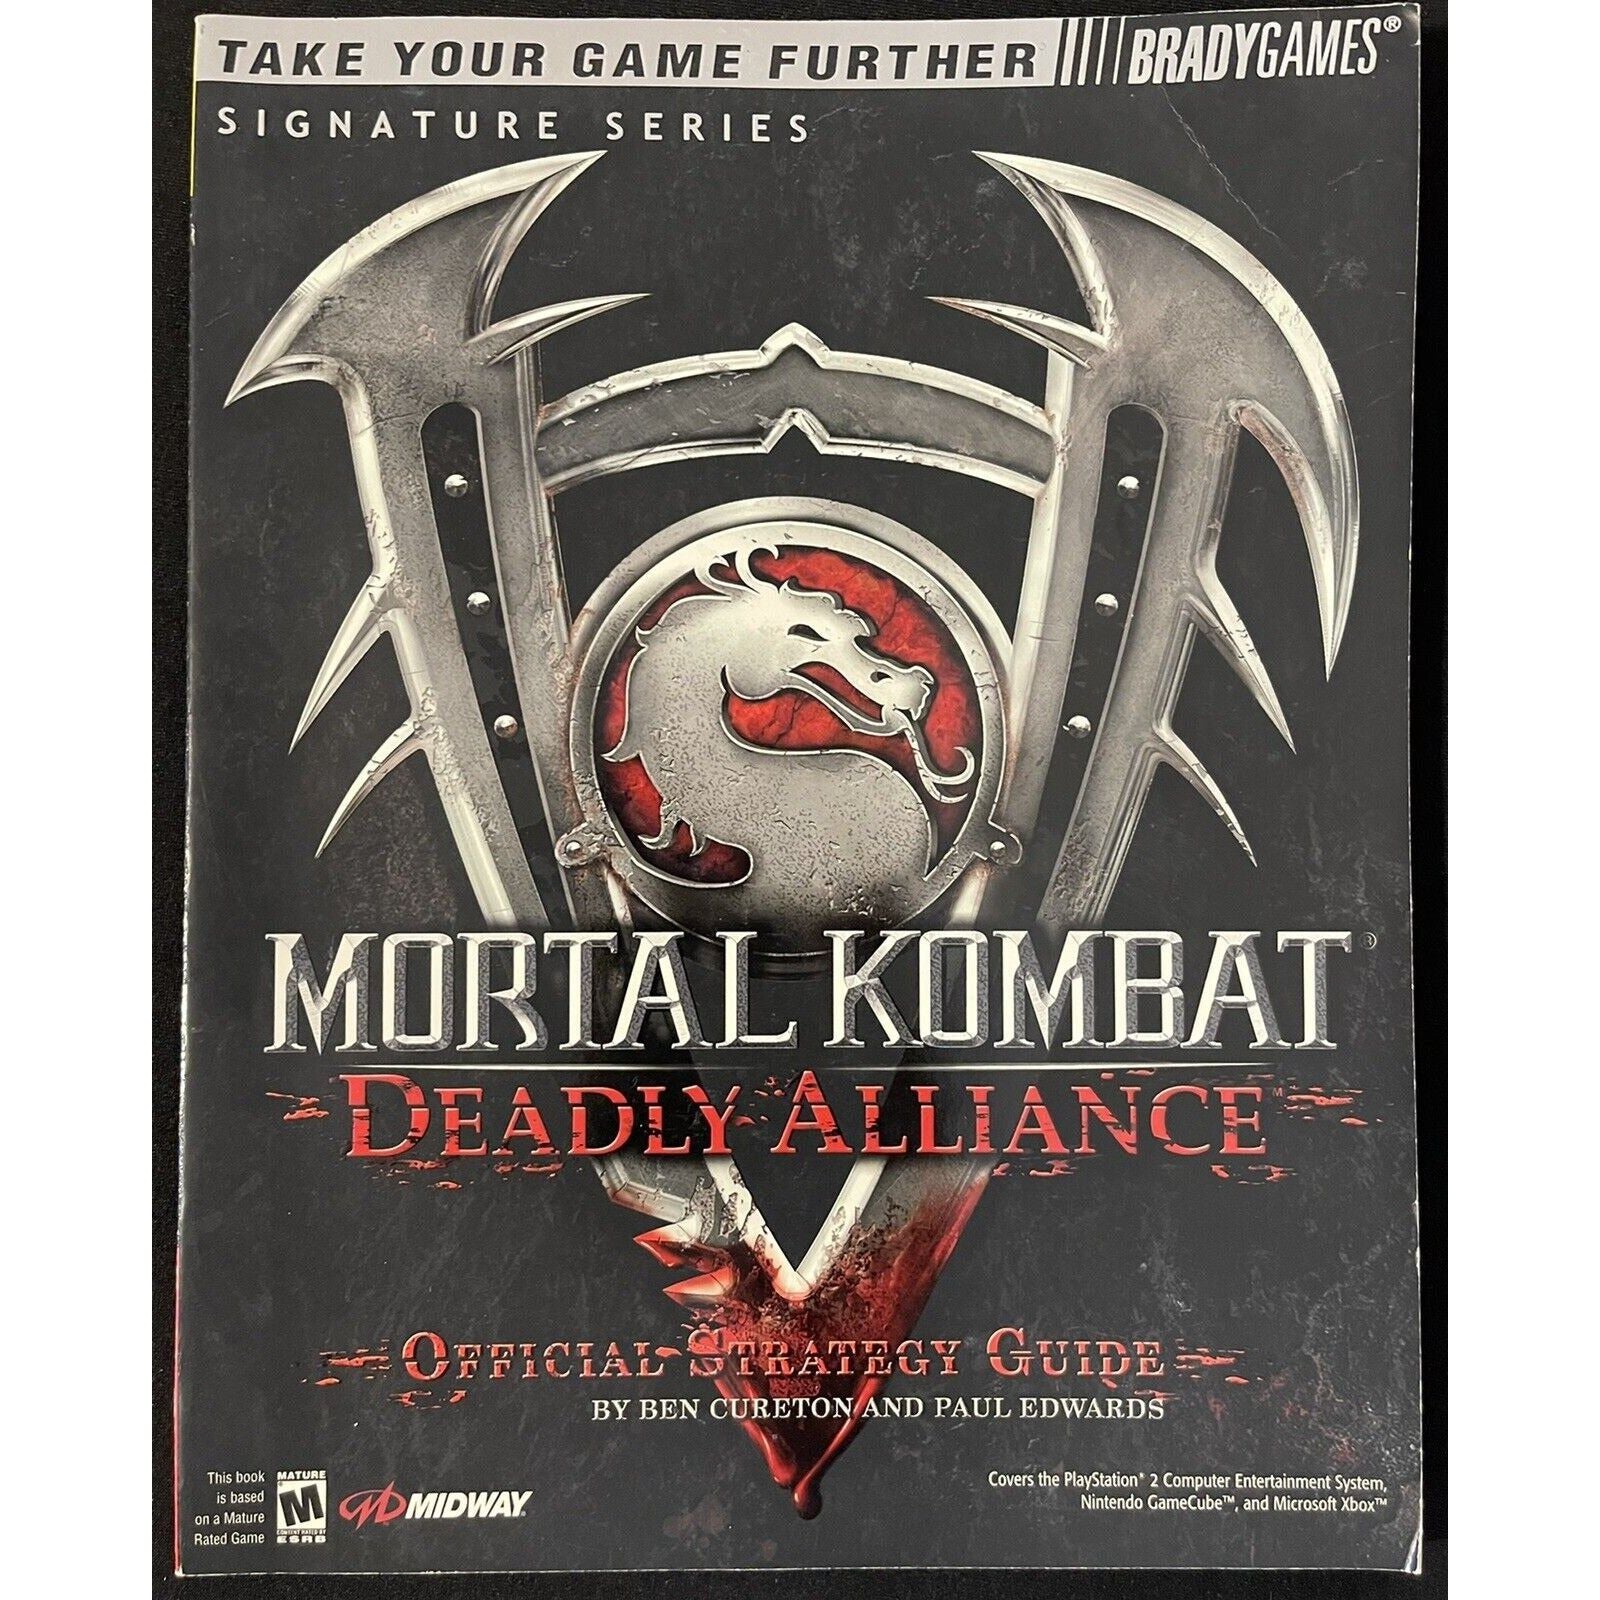 Mortal Kombat Deadly Alliance Official Strategy Guide - Bradygames